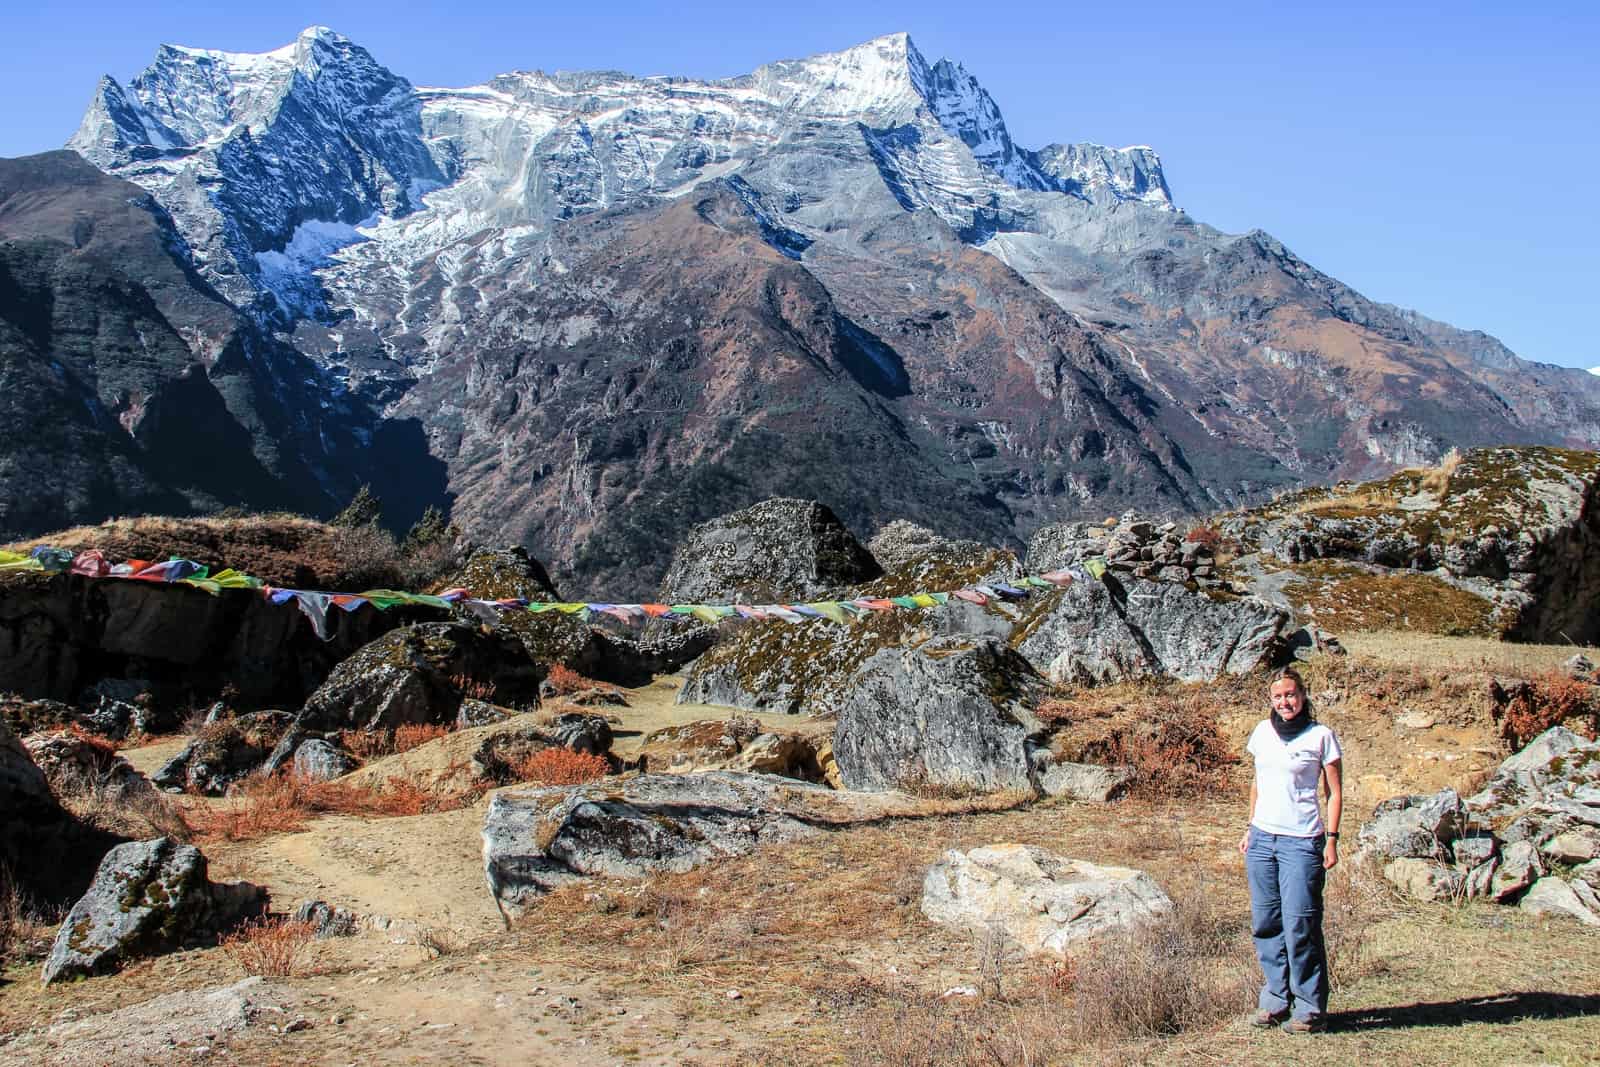 A woman in a white t-shirt and blue trekking pants stands in front of large black rocks strewn with multi-coloured prayer flags and a huge snow capped mountain face